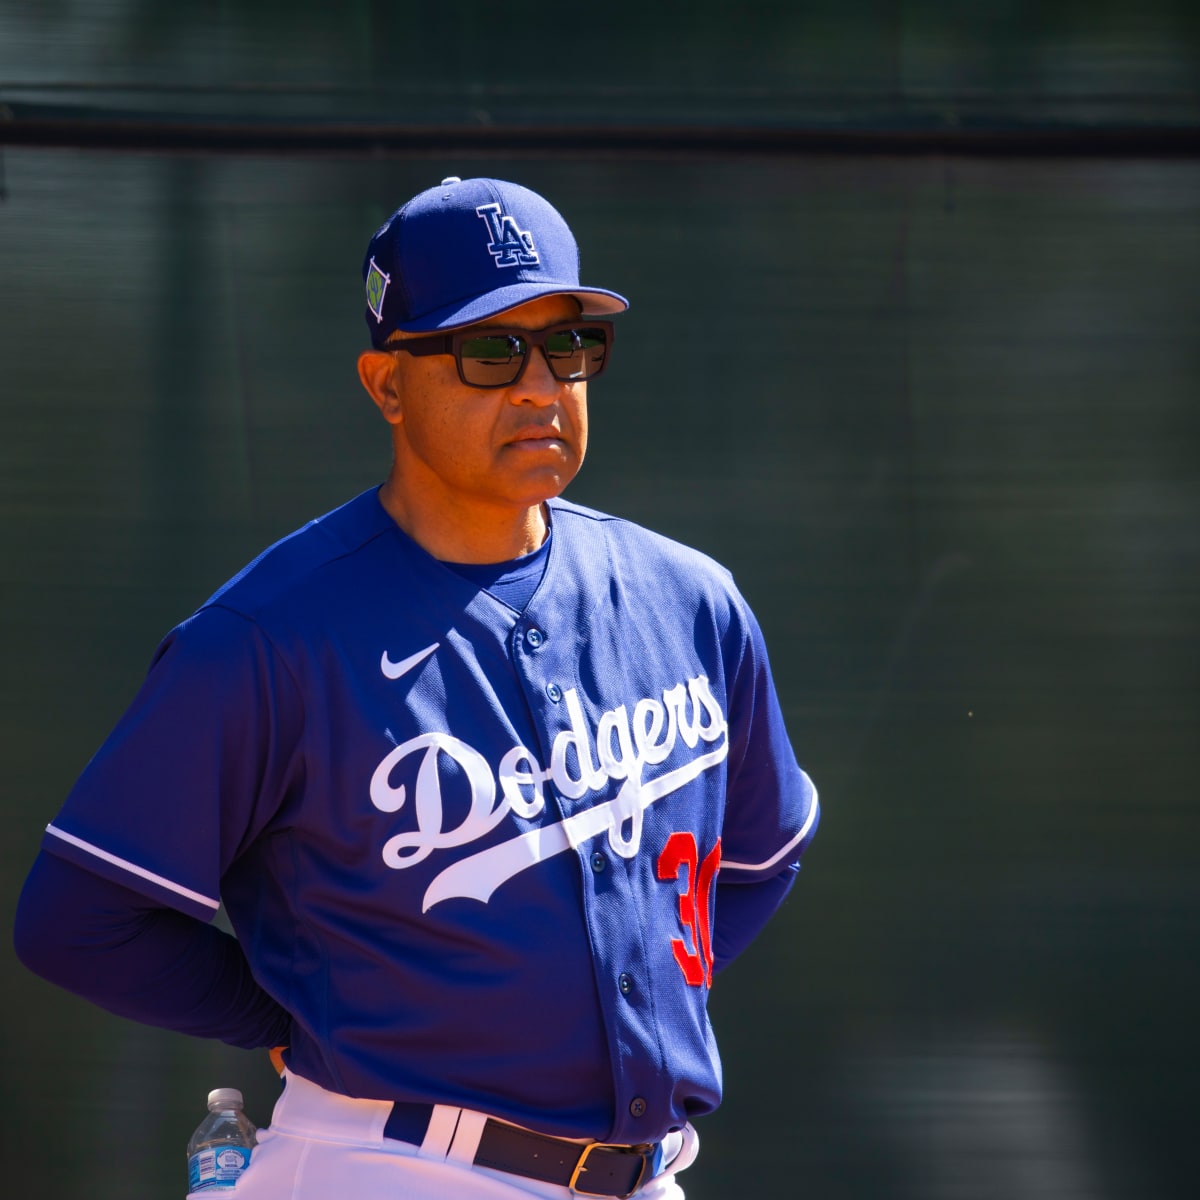 Dave Roberts' confident take on Dodgers' outfield situation